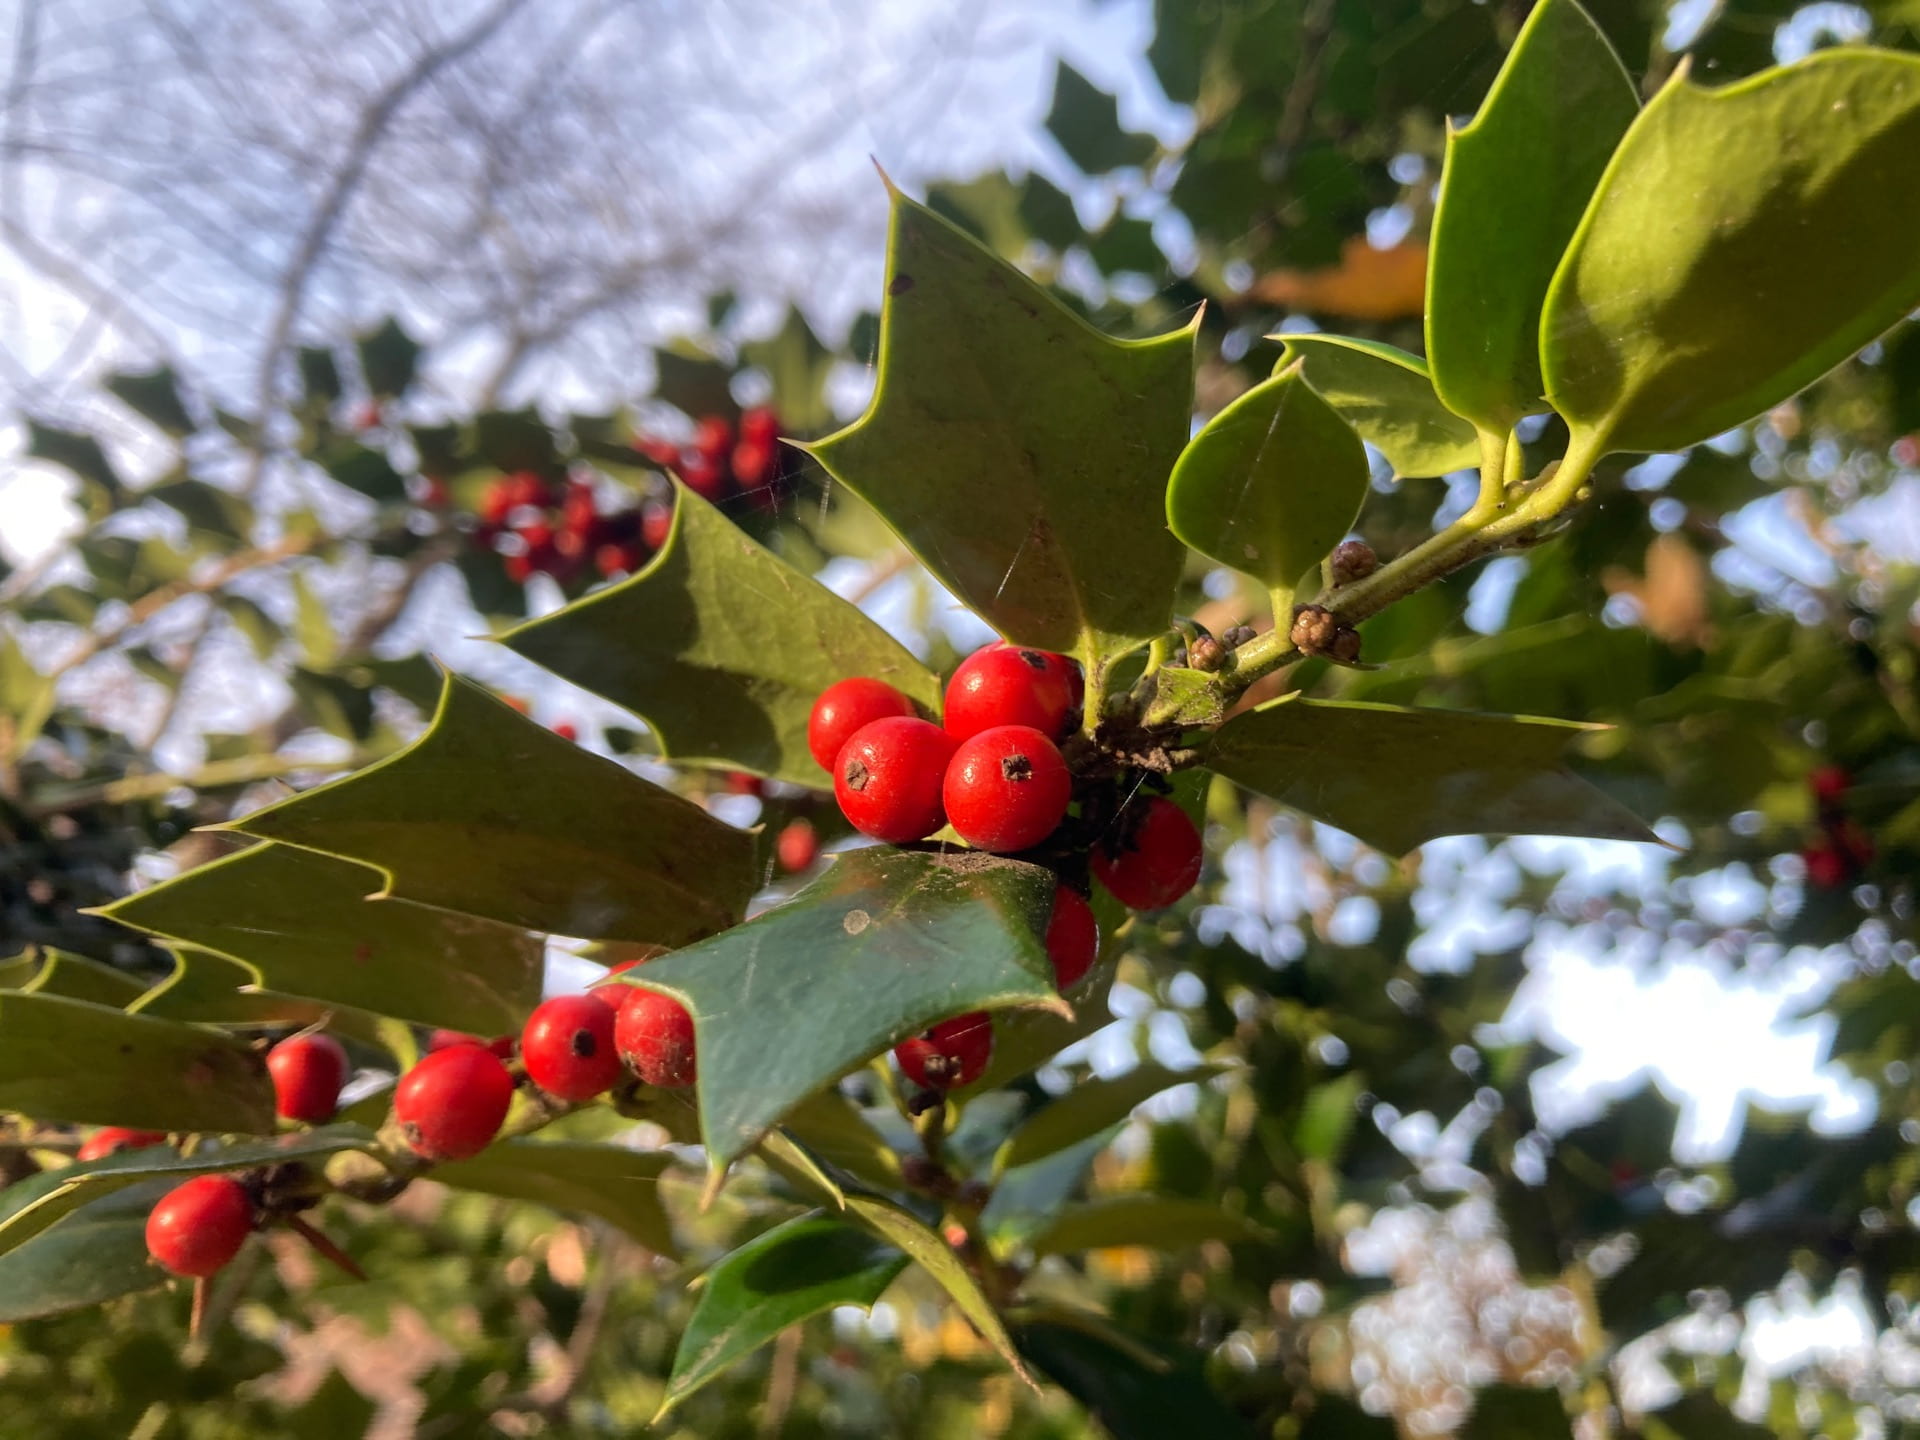 Fruit of Ilex x 'Lydia Morris', named after one of the previous owners of Morris Arboretum.